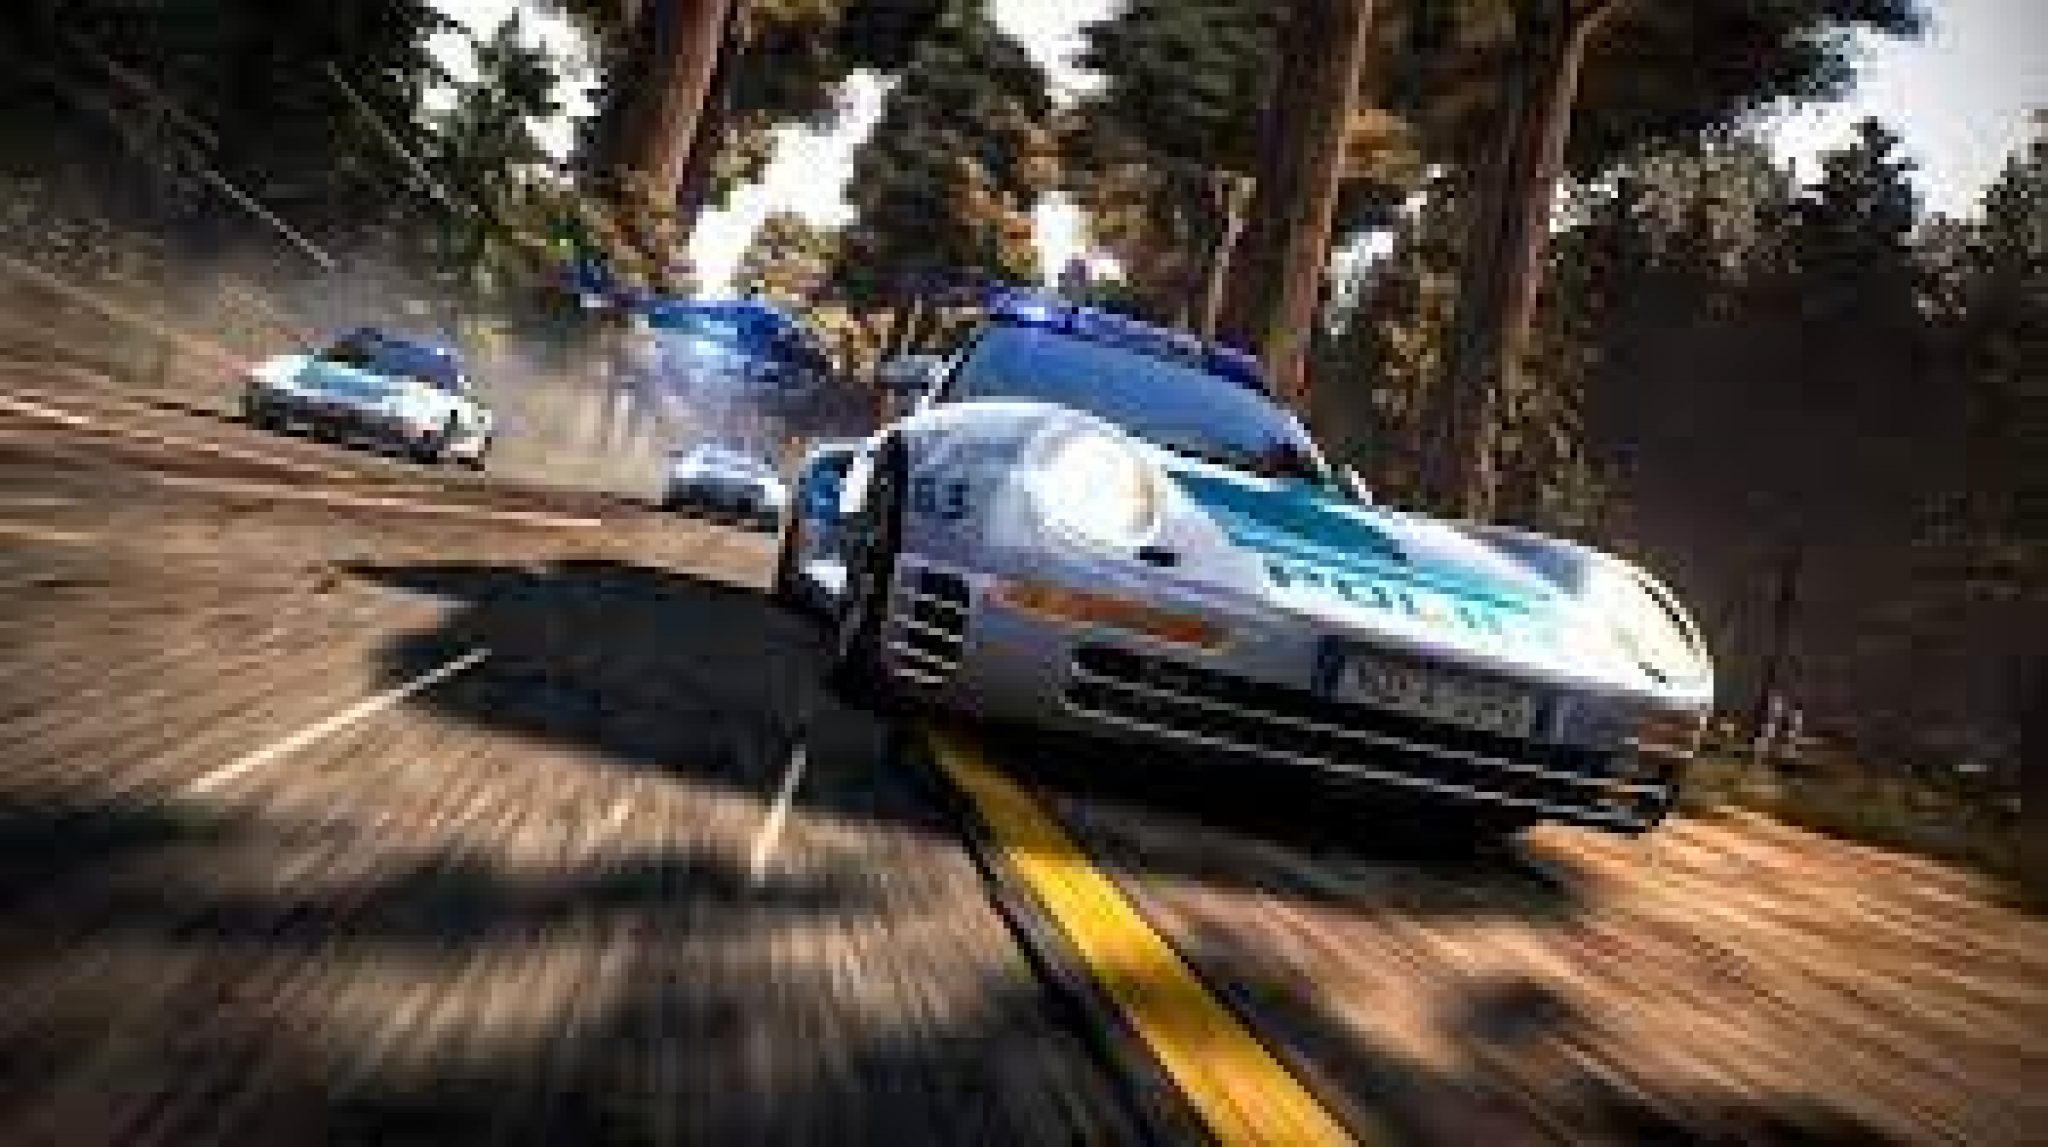 nfs hot pursuit 2 highly compressed